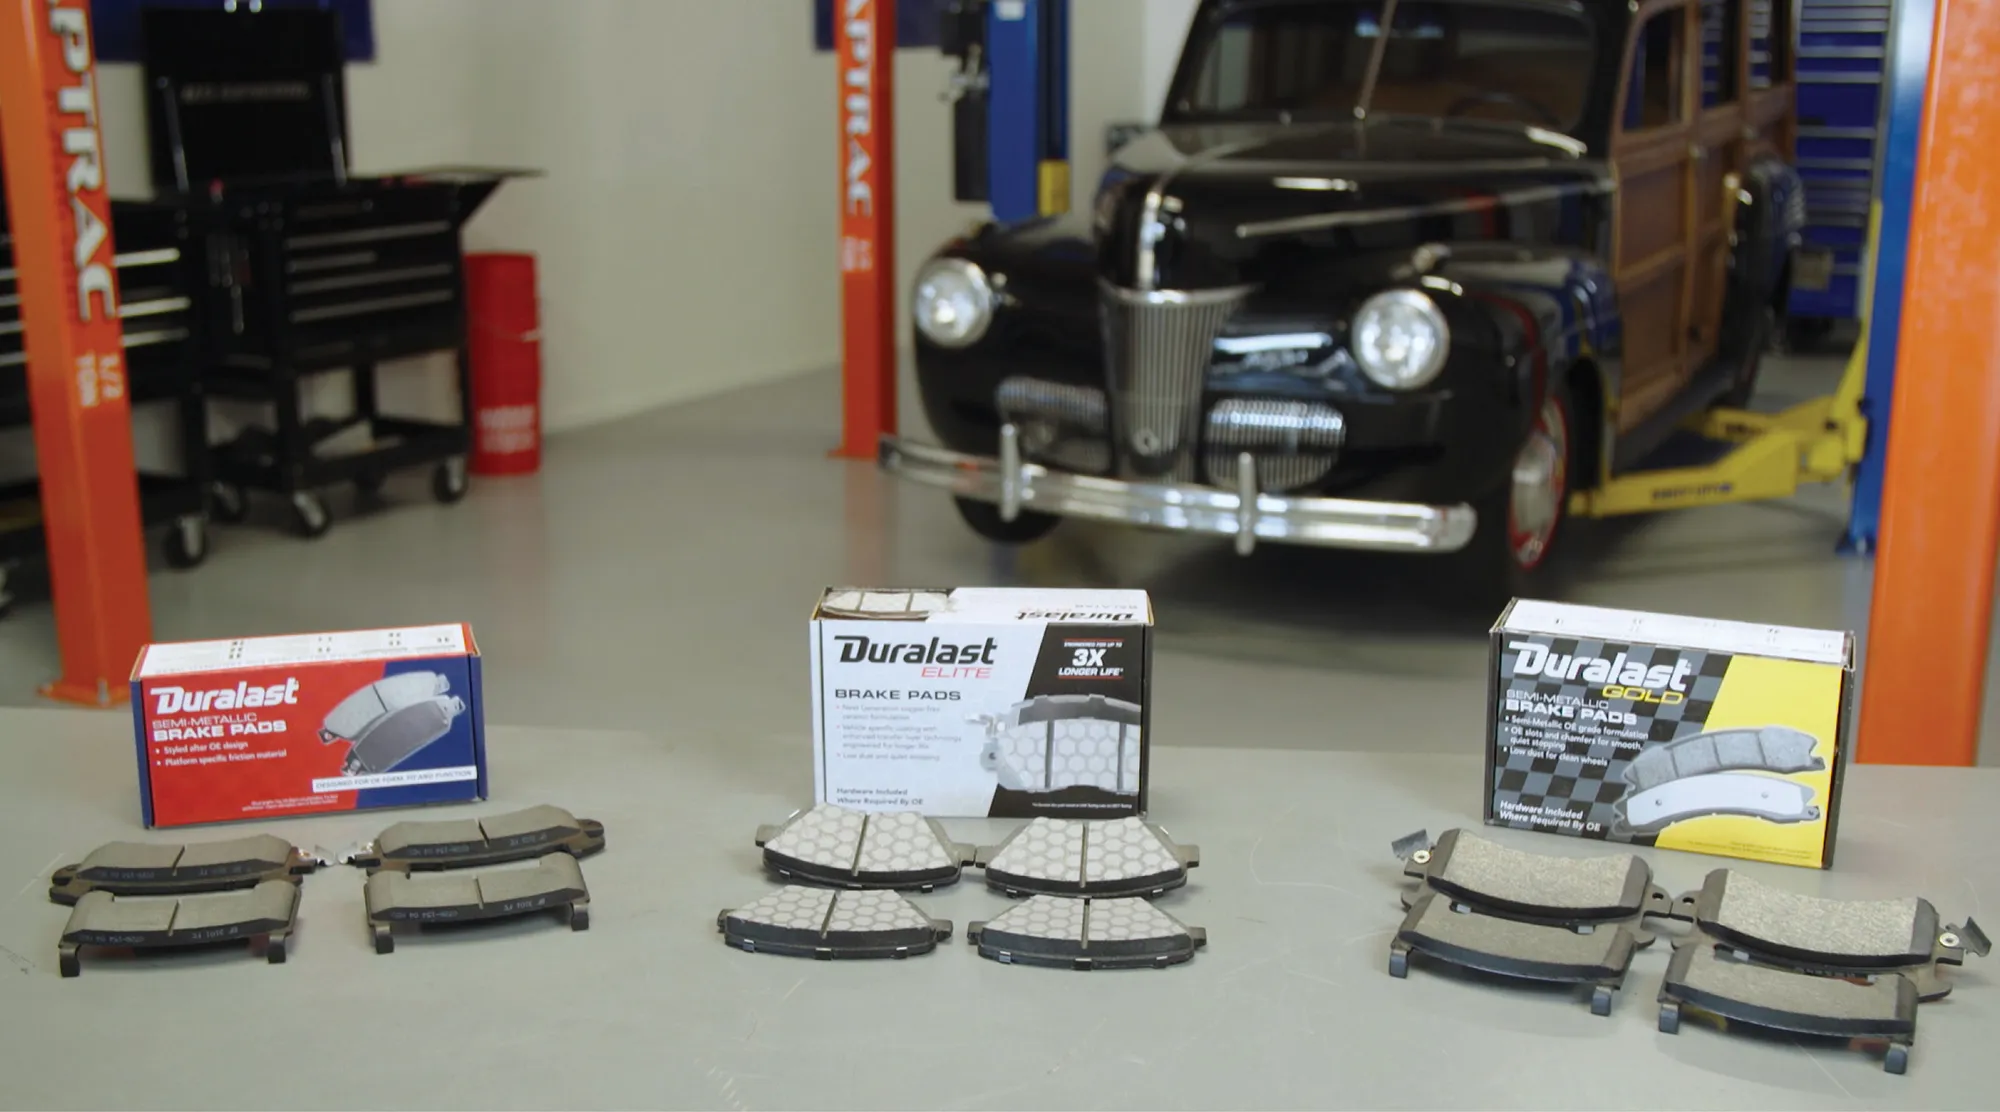 There are three popular Duralast brake pads that can be used on your cars or trucks: the Duralast, the Duralast Gold, and the Duralast Elite.